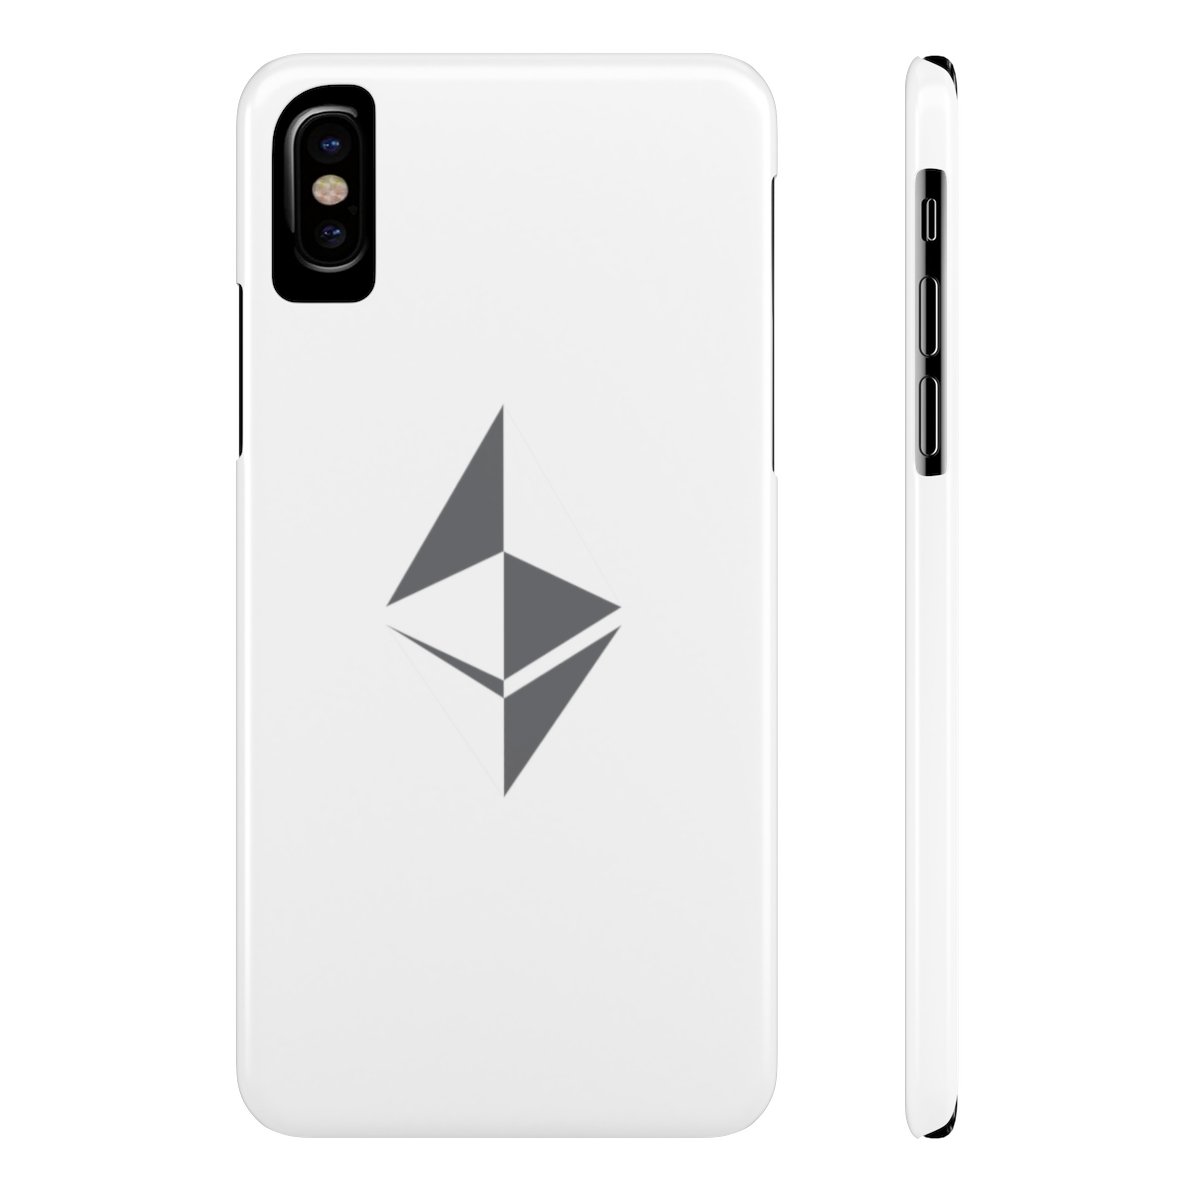 Thiết kế bề mặt Ethereum - Case Mate Slim Phone Case TCP1607 iPhone X Slim Official Crypto Merch